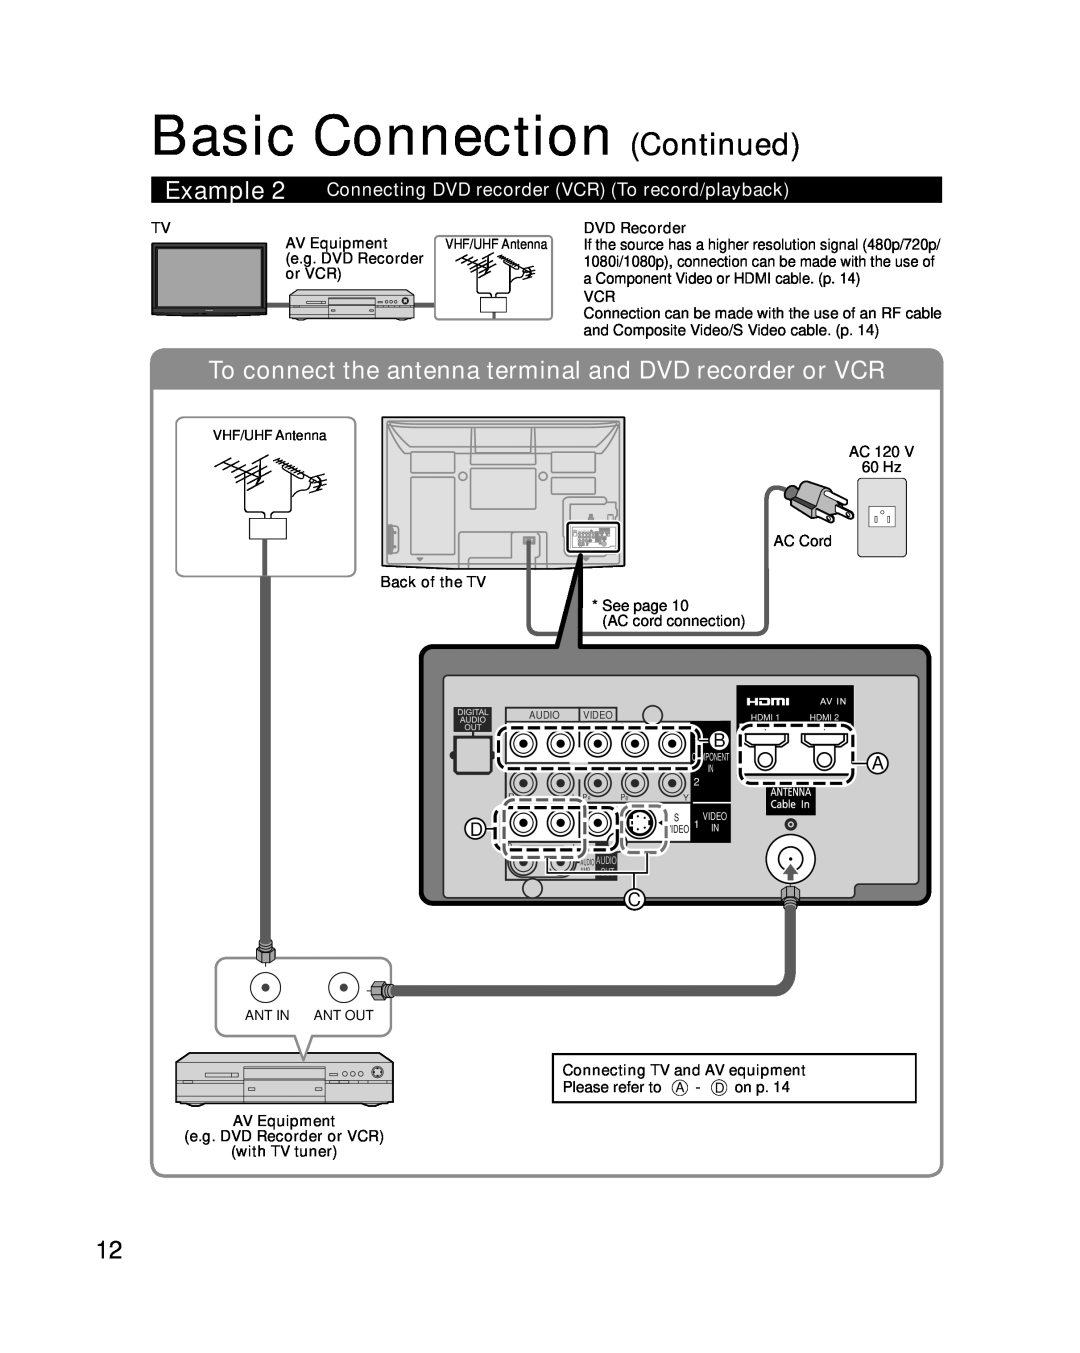 Panasonic TC-P50G10 Basic Connection Continued, To connect the antenna terminal and DVD recorder or VCR, Example 